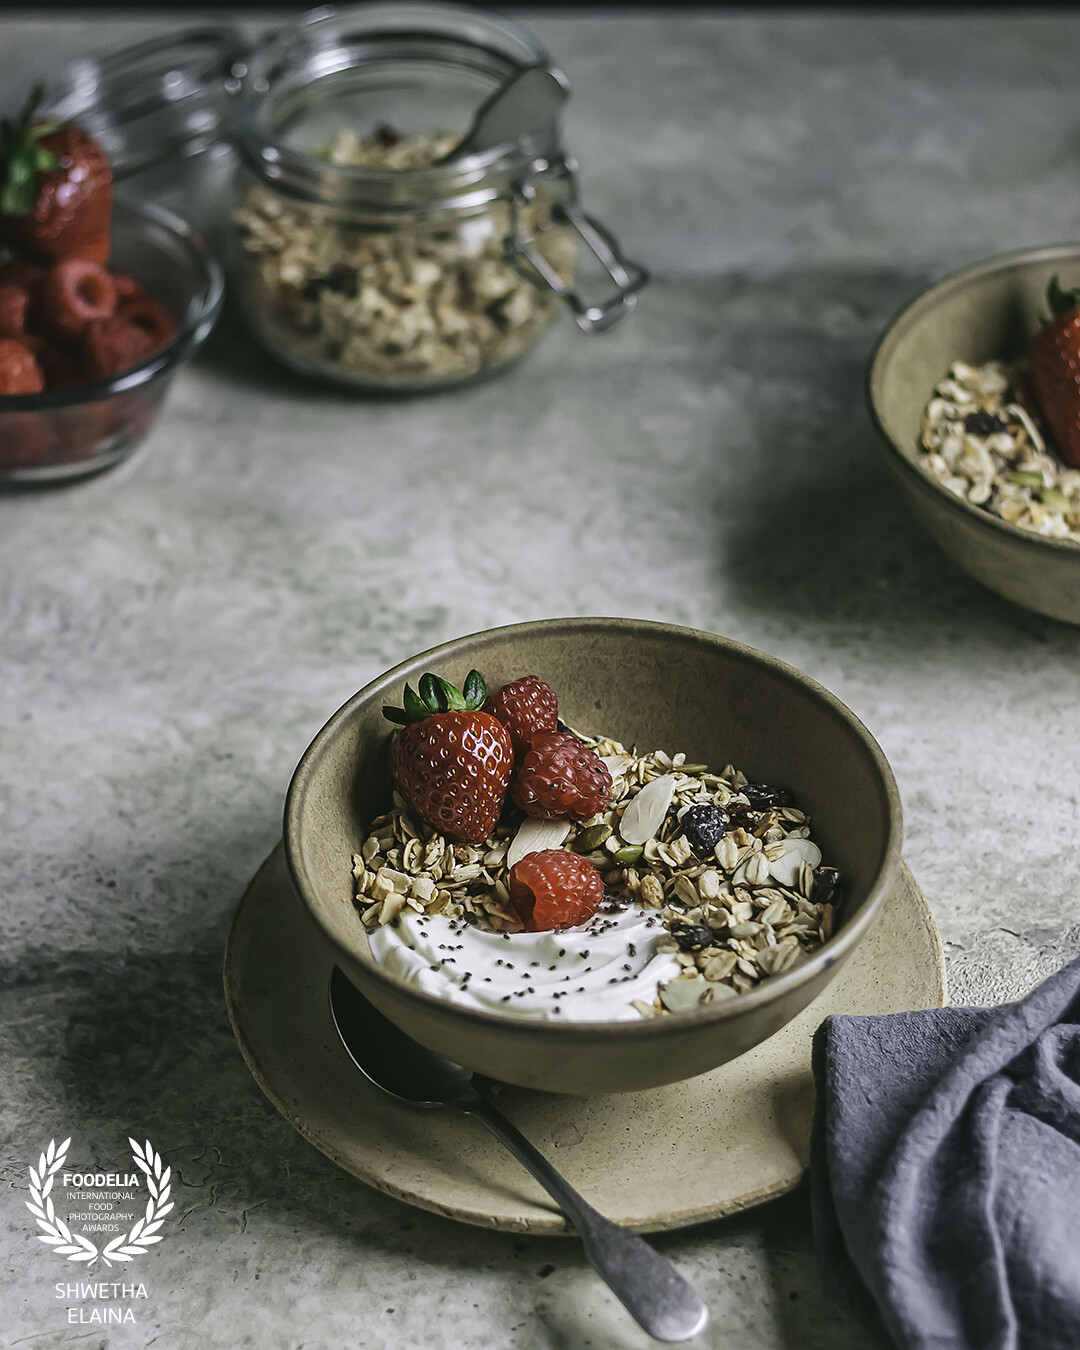 This homemade granola is my go-to no artificial added sugar choice. Made with GF oats, almonds, seeds (anything that is at hand), coconut flakes, dates and any dried fruit, this is easy to make, pack for a take along and fulfilling to eat.